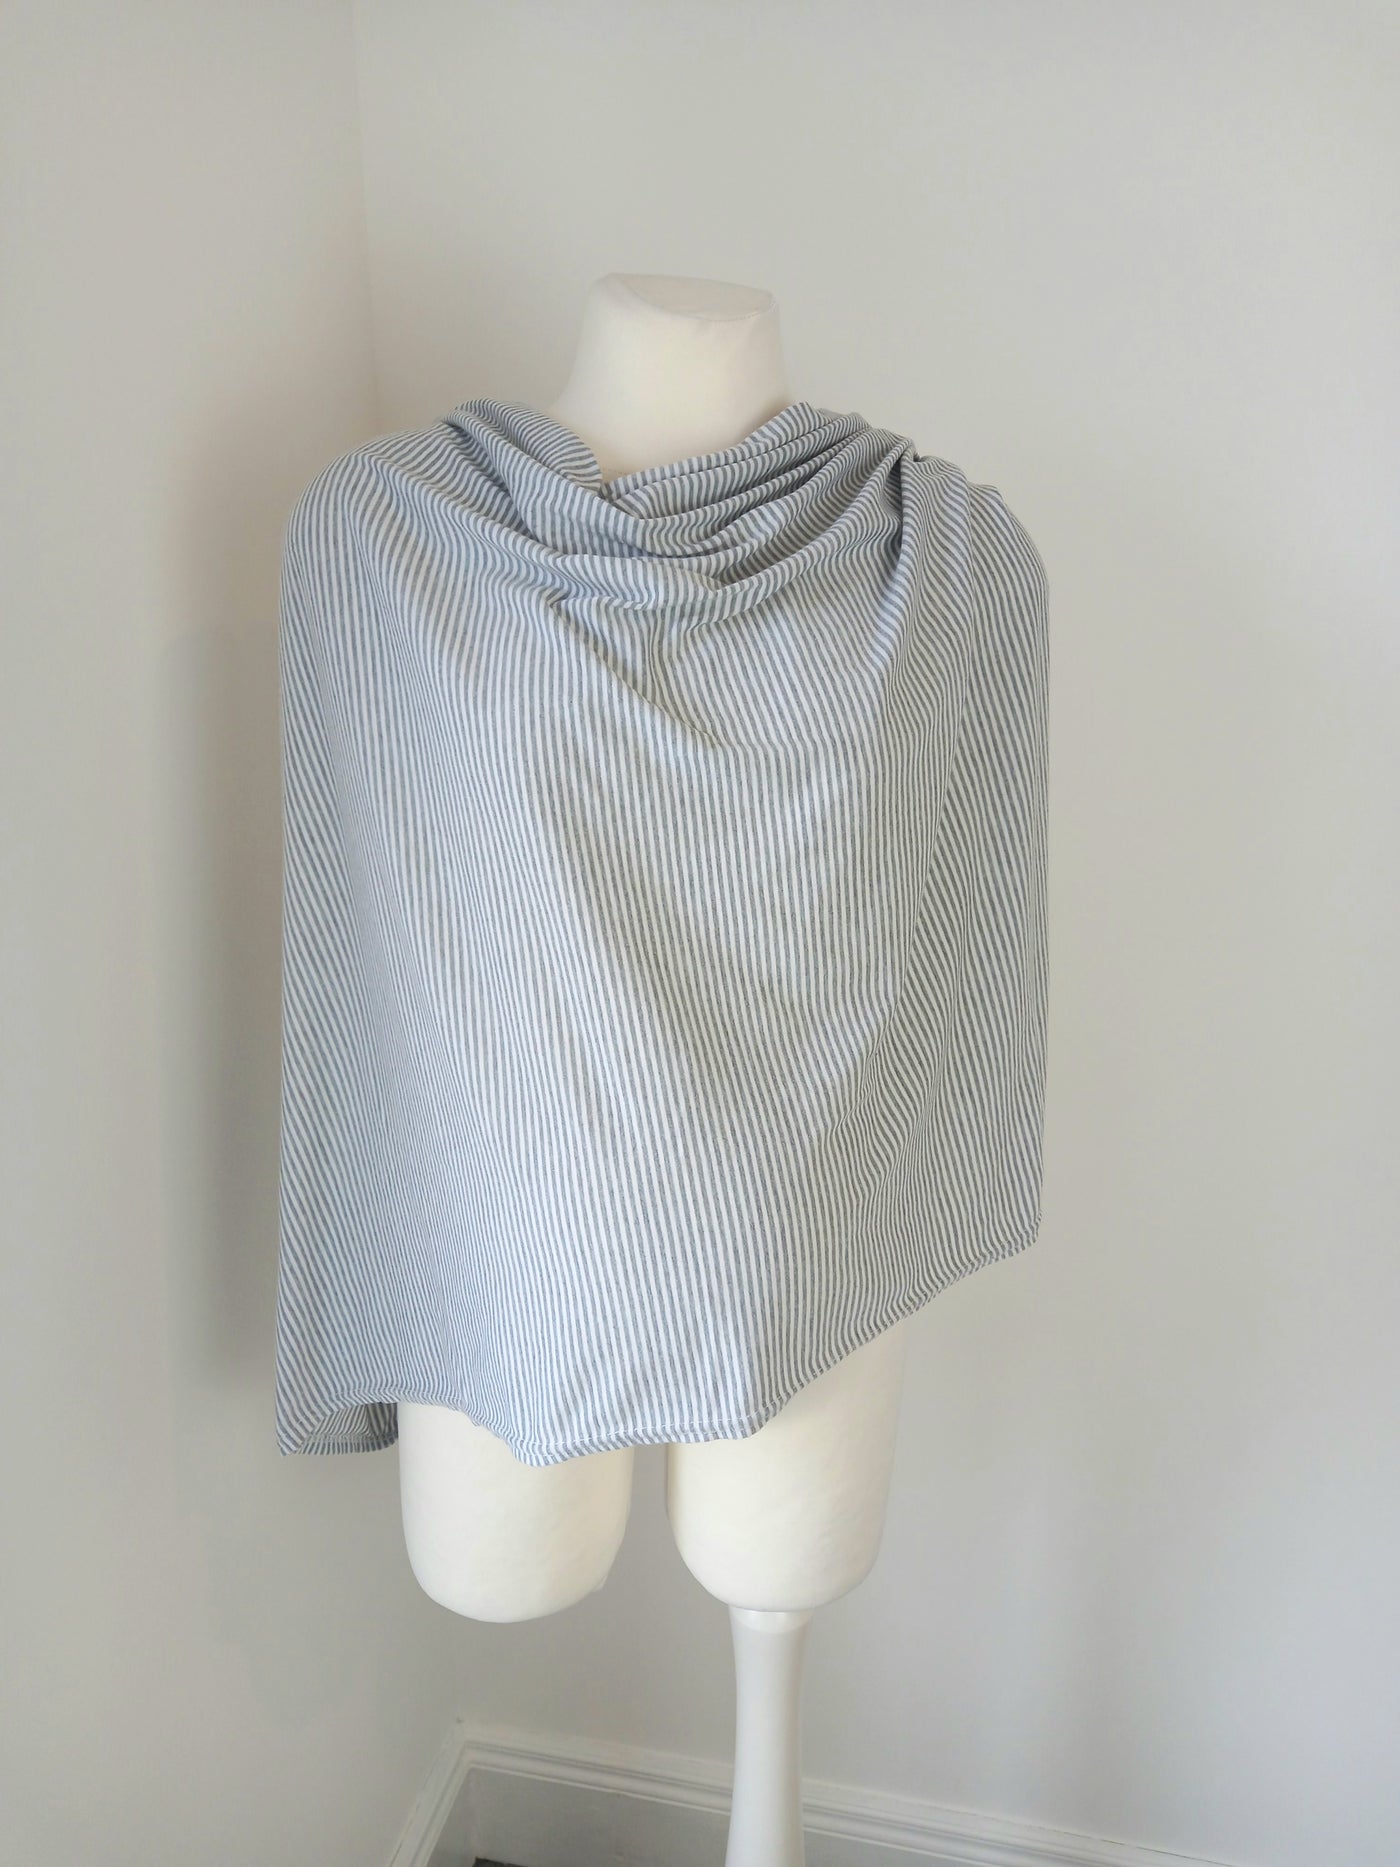 Kiddo Care grey & white striped infinity nursing scarf and cover - One Size